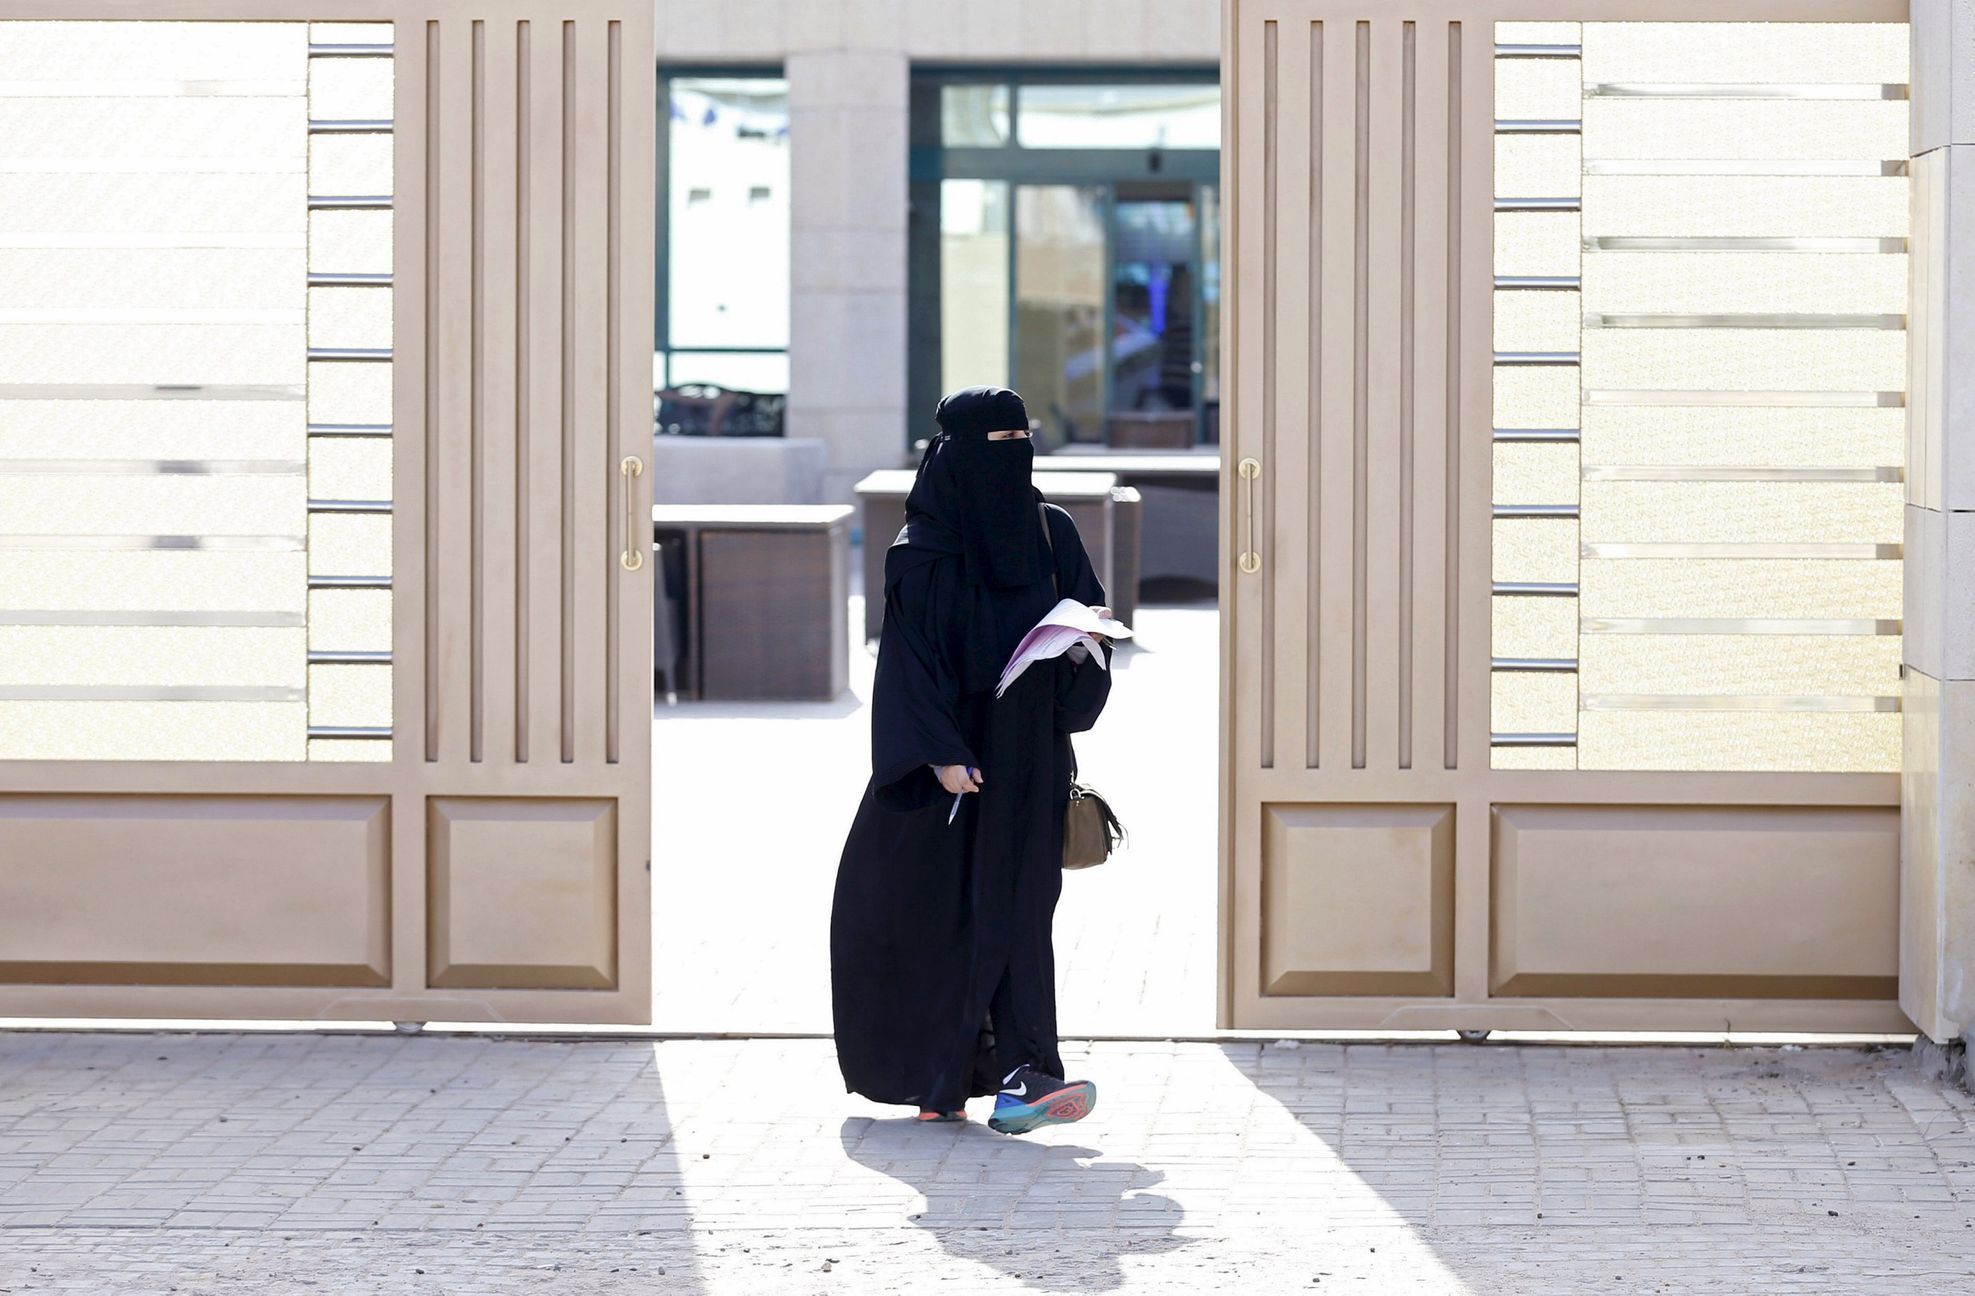 Woman leaves a polling station after casting her vote during municipal elections, in Riyadh, Saudi Arabia